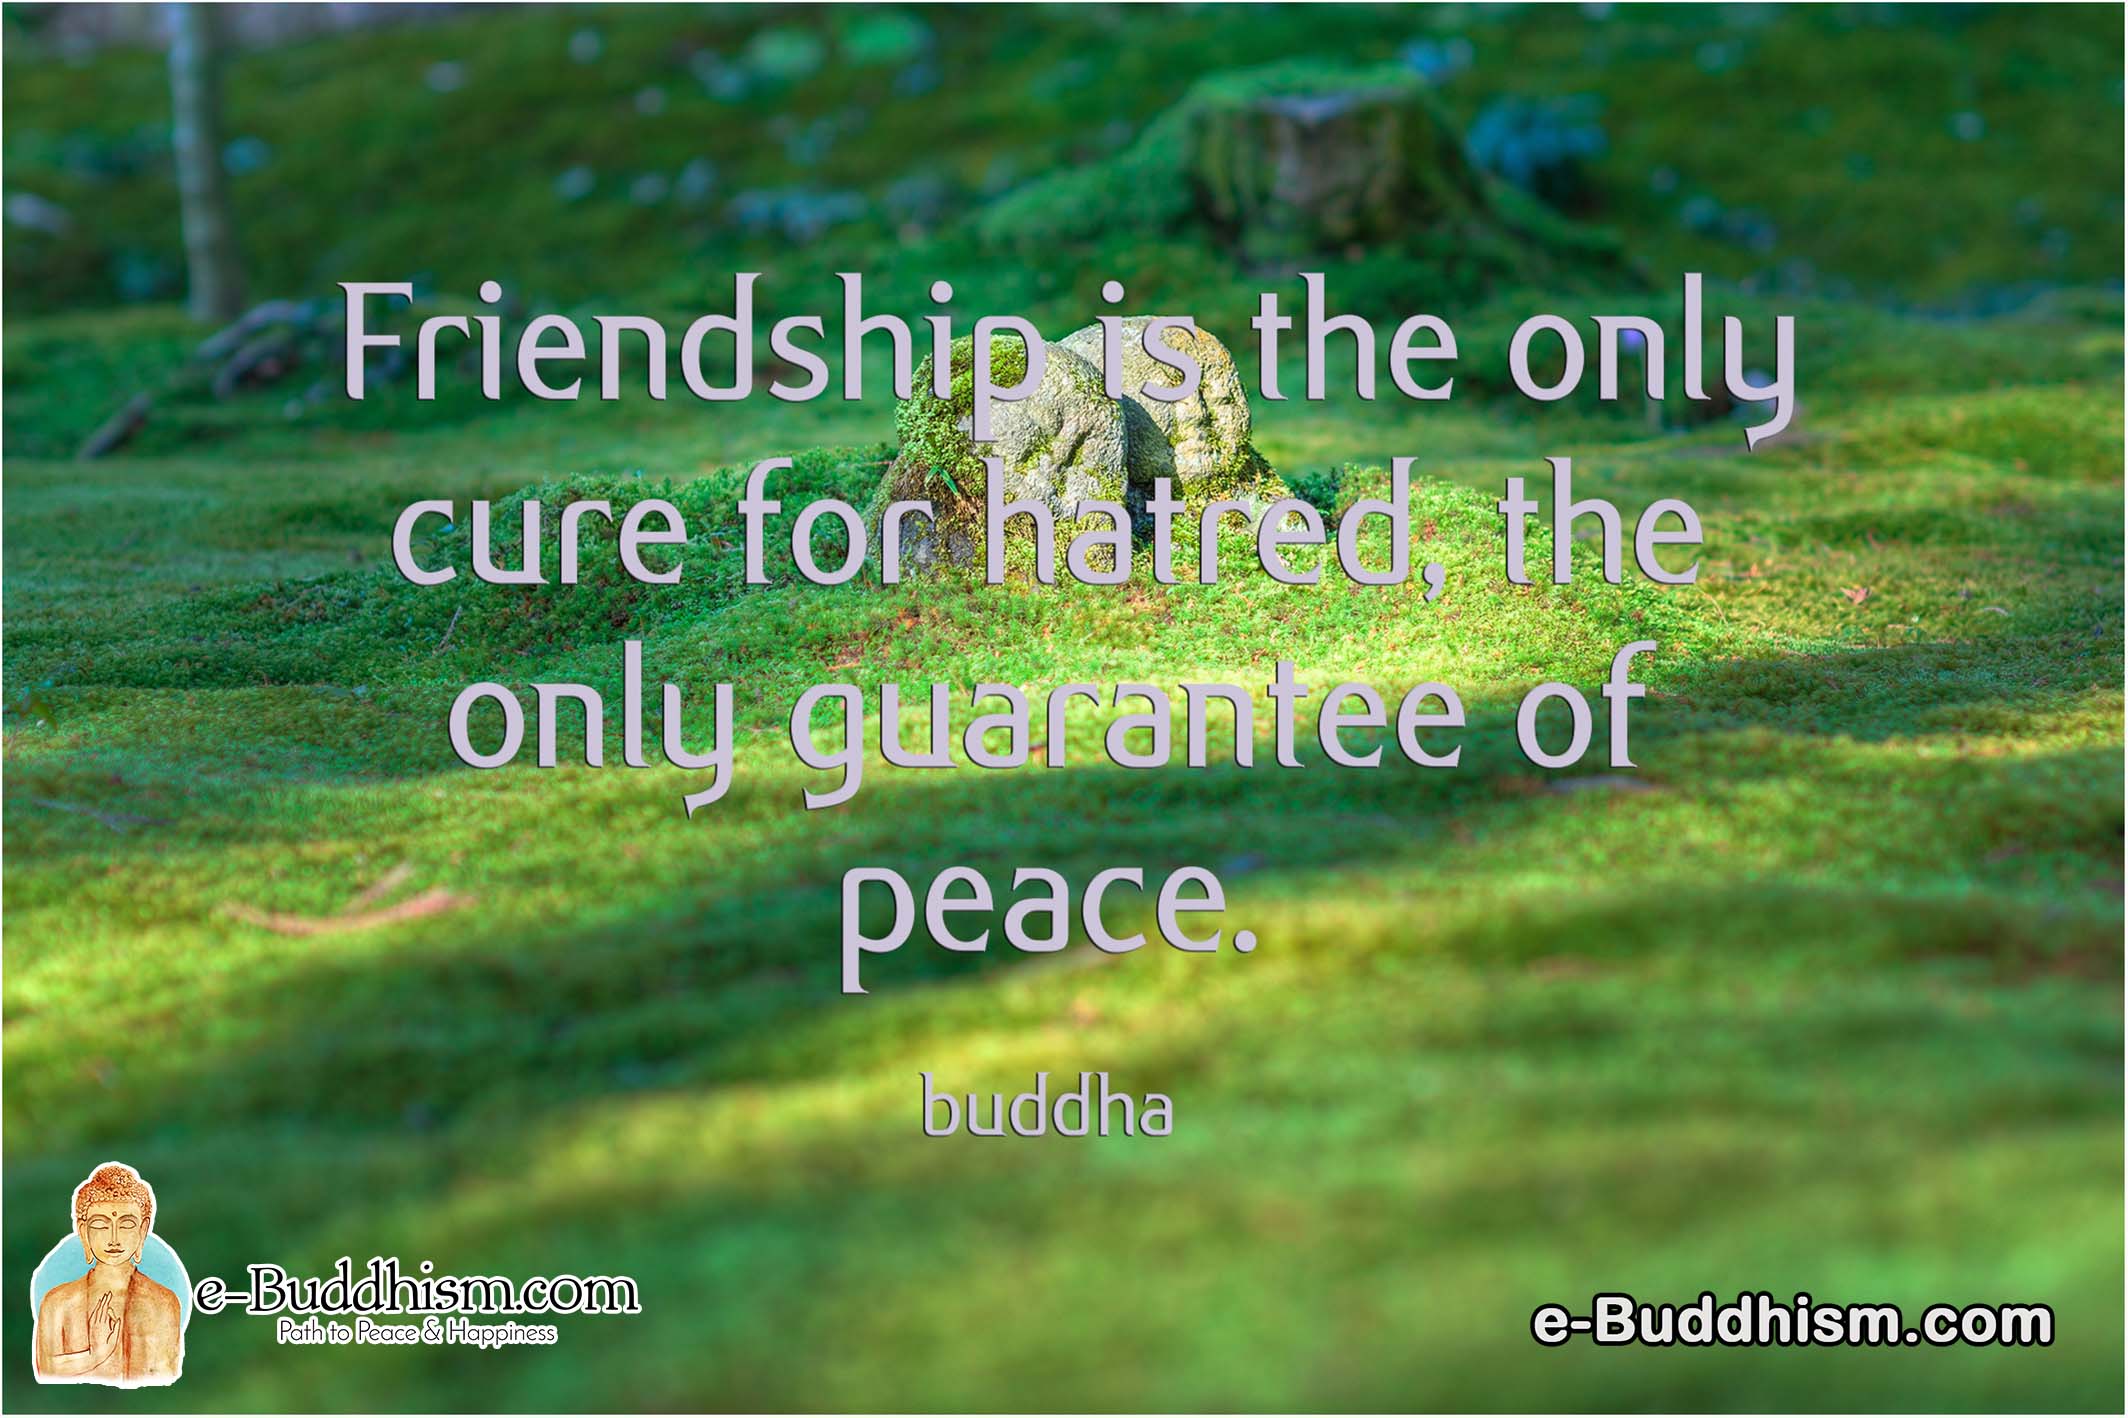 Friendship is the only cure for hatred the only guarantee of peace. -Buddha